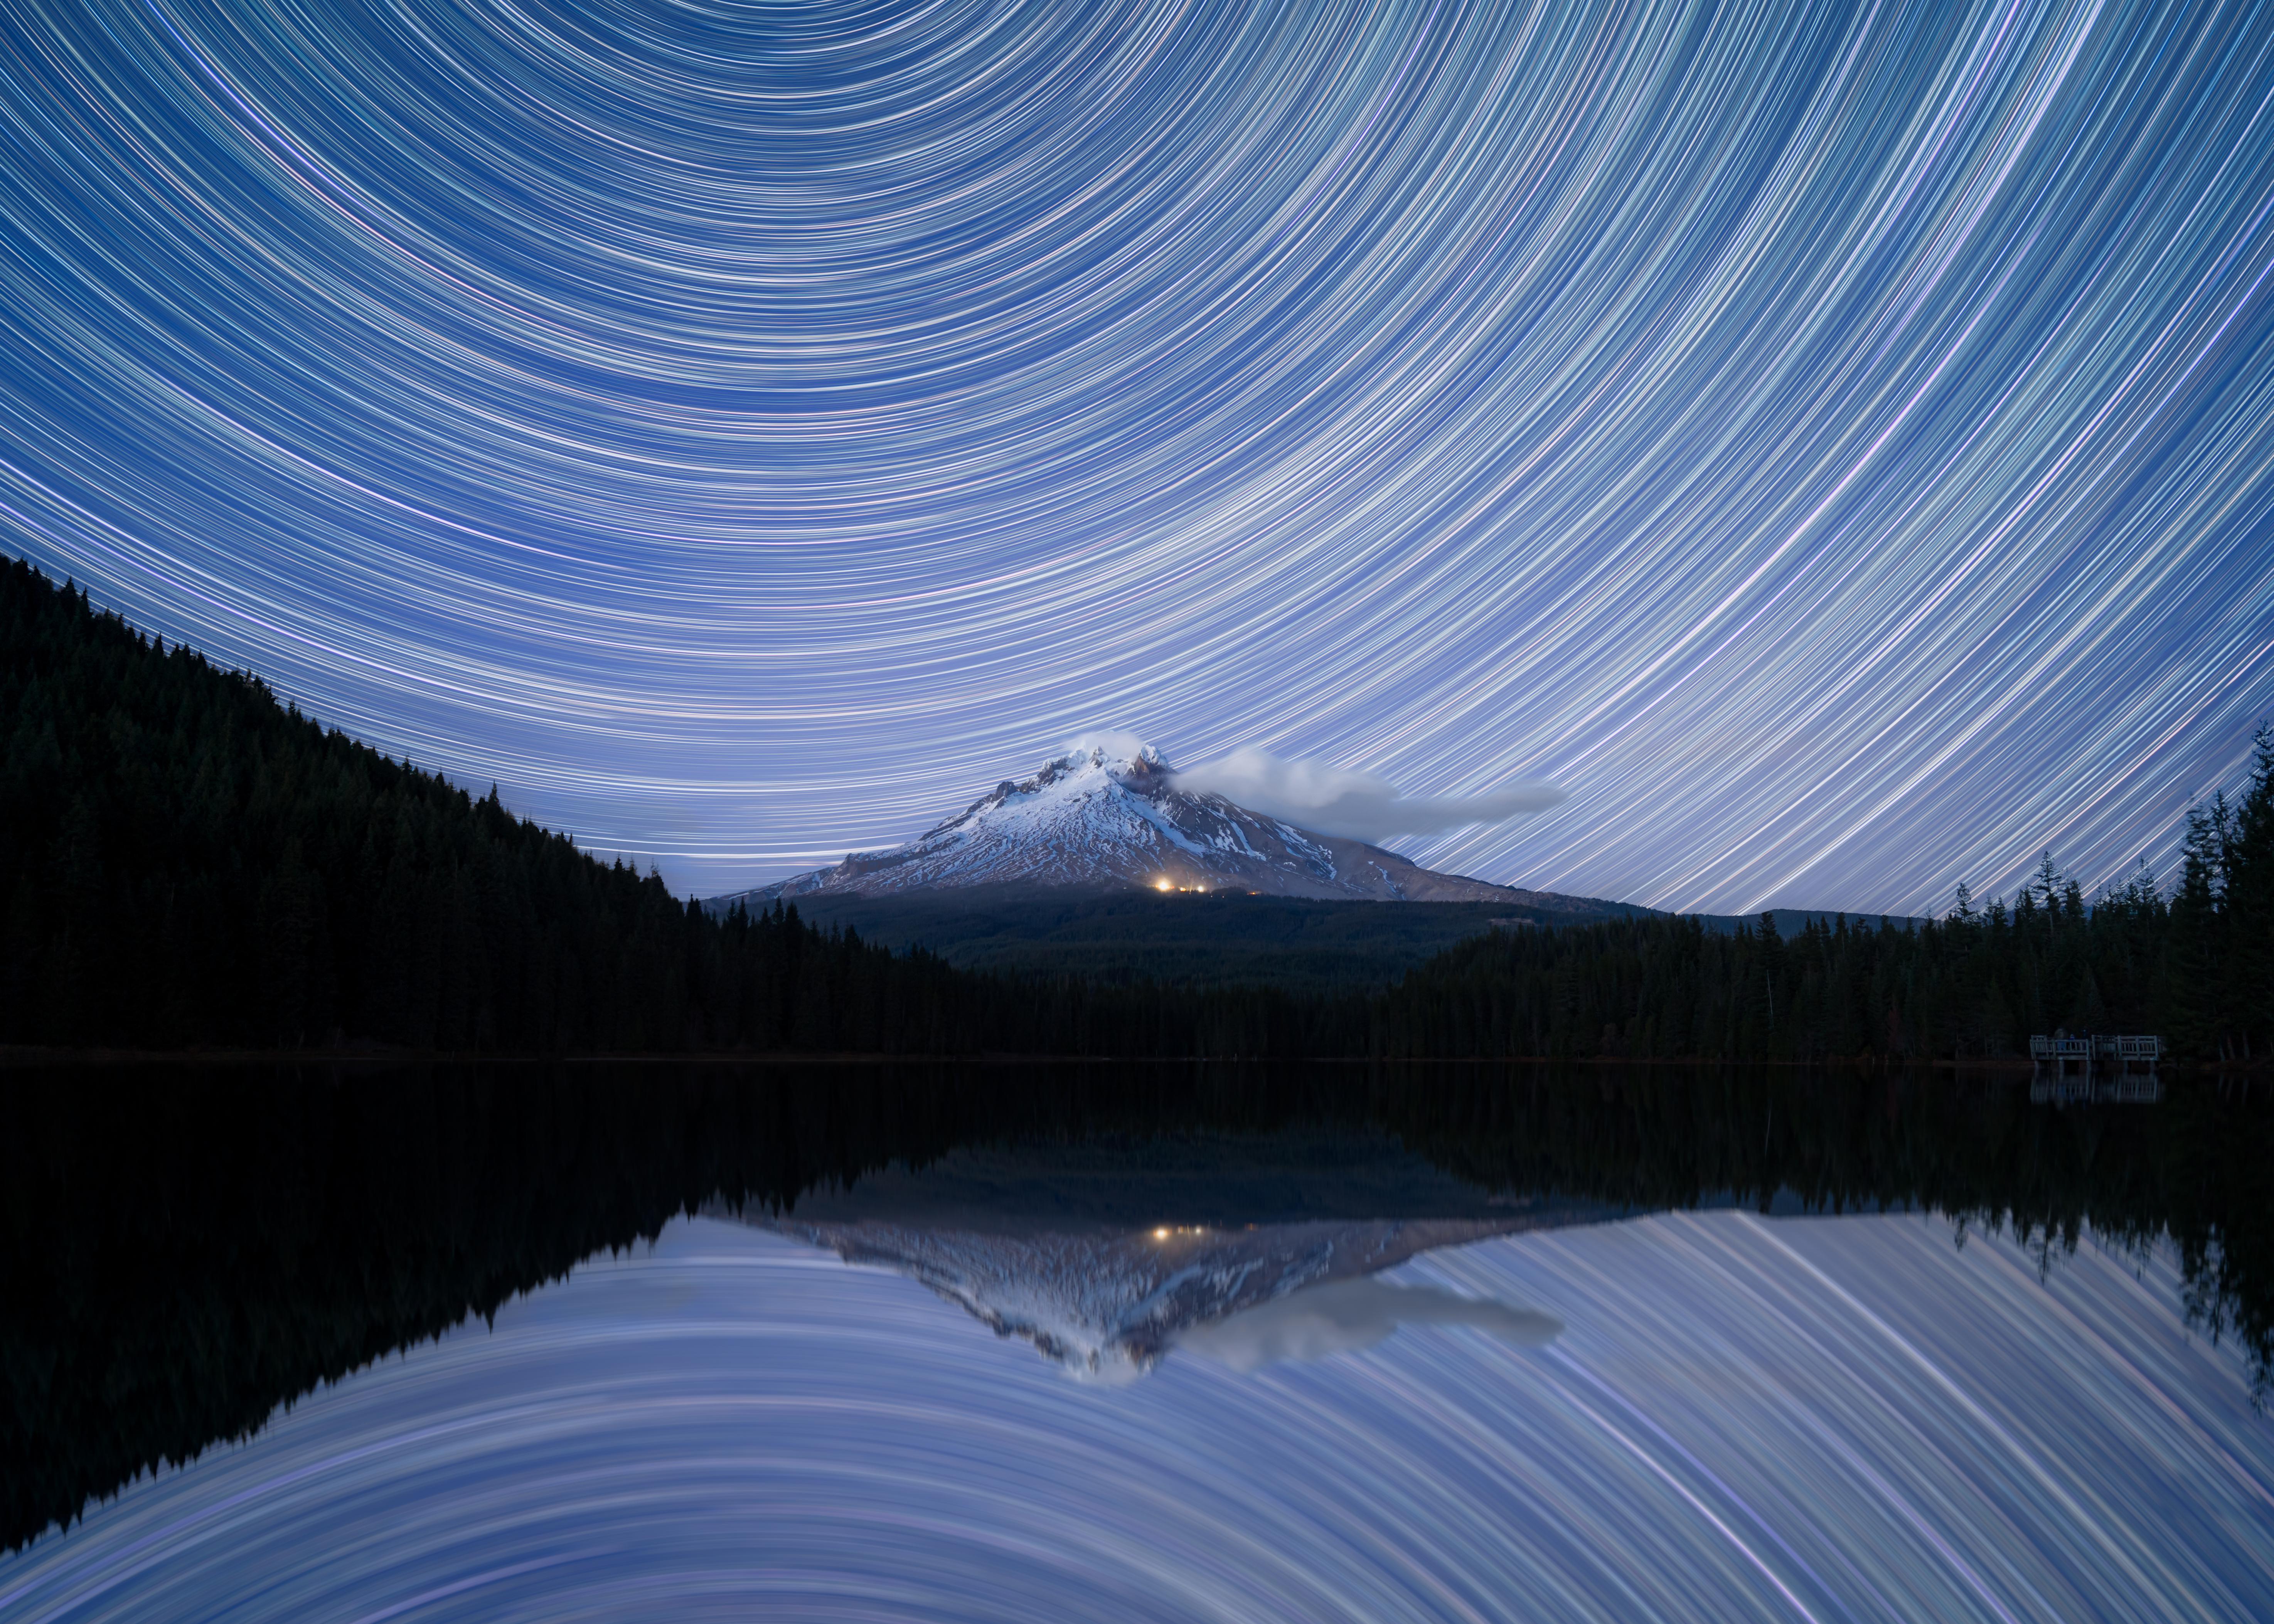 General 5898x4213 nature landscape night stars dark long exposure mountains pine trees forest lake reflection snowy peak photography Mount Hood Oregon USA clouds